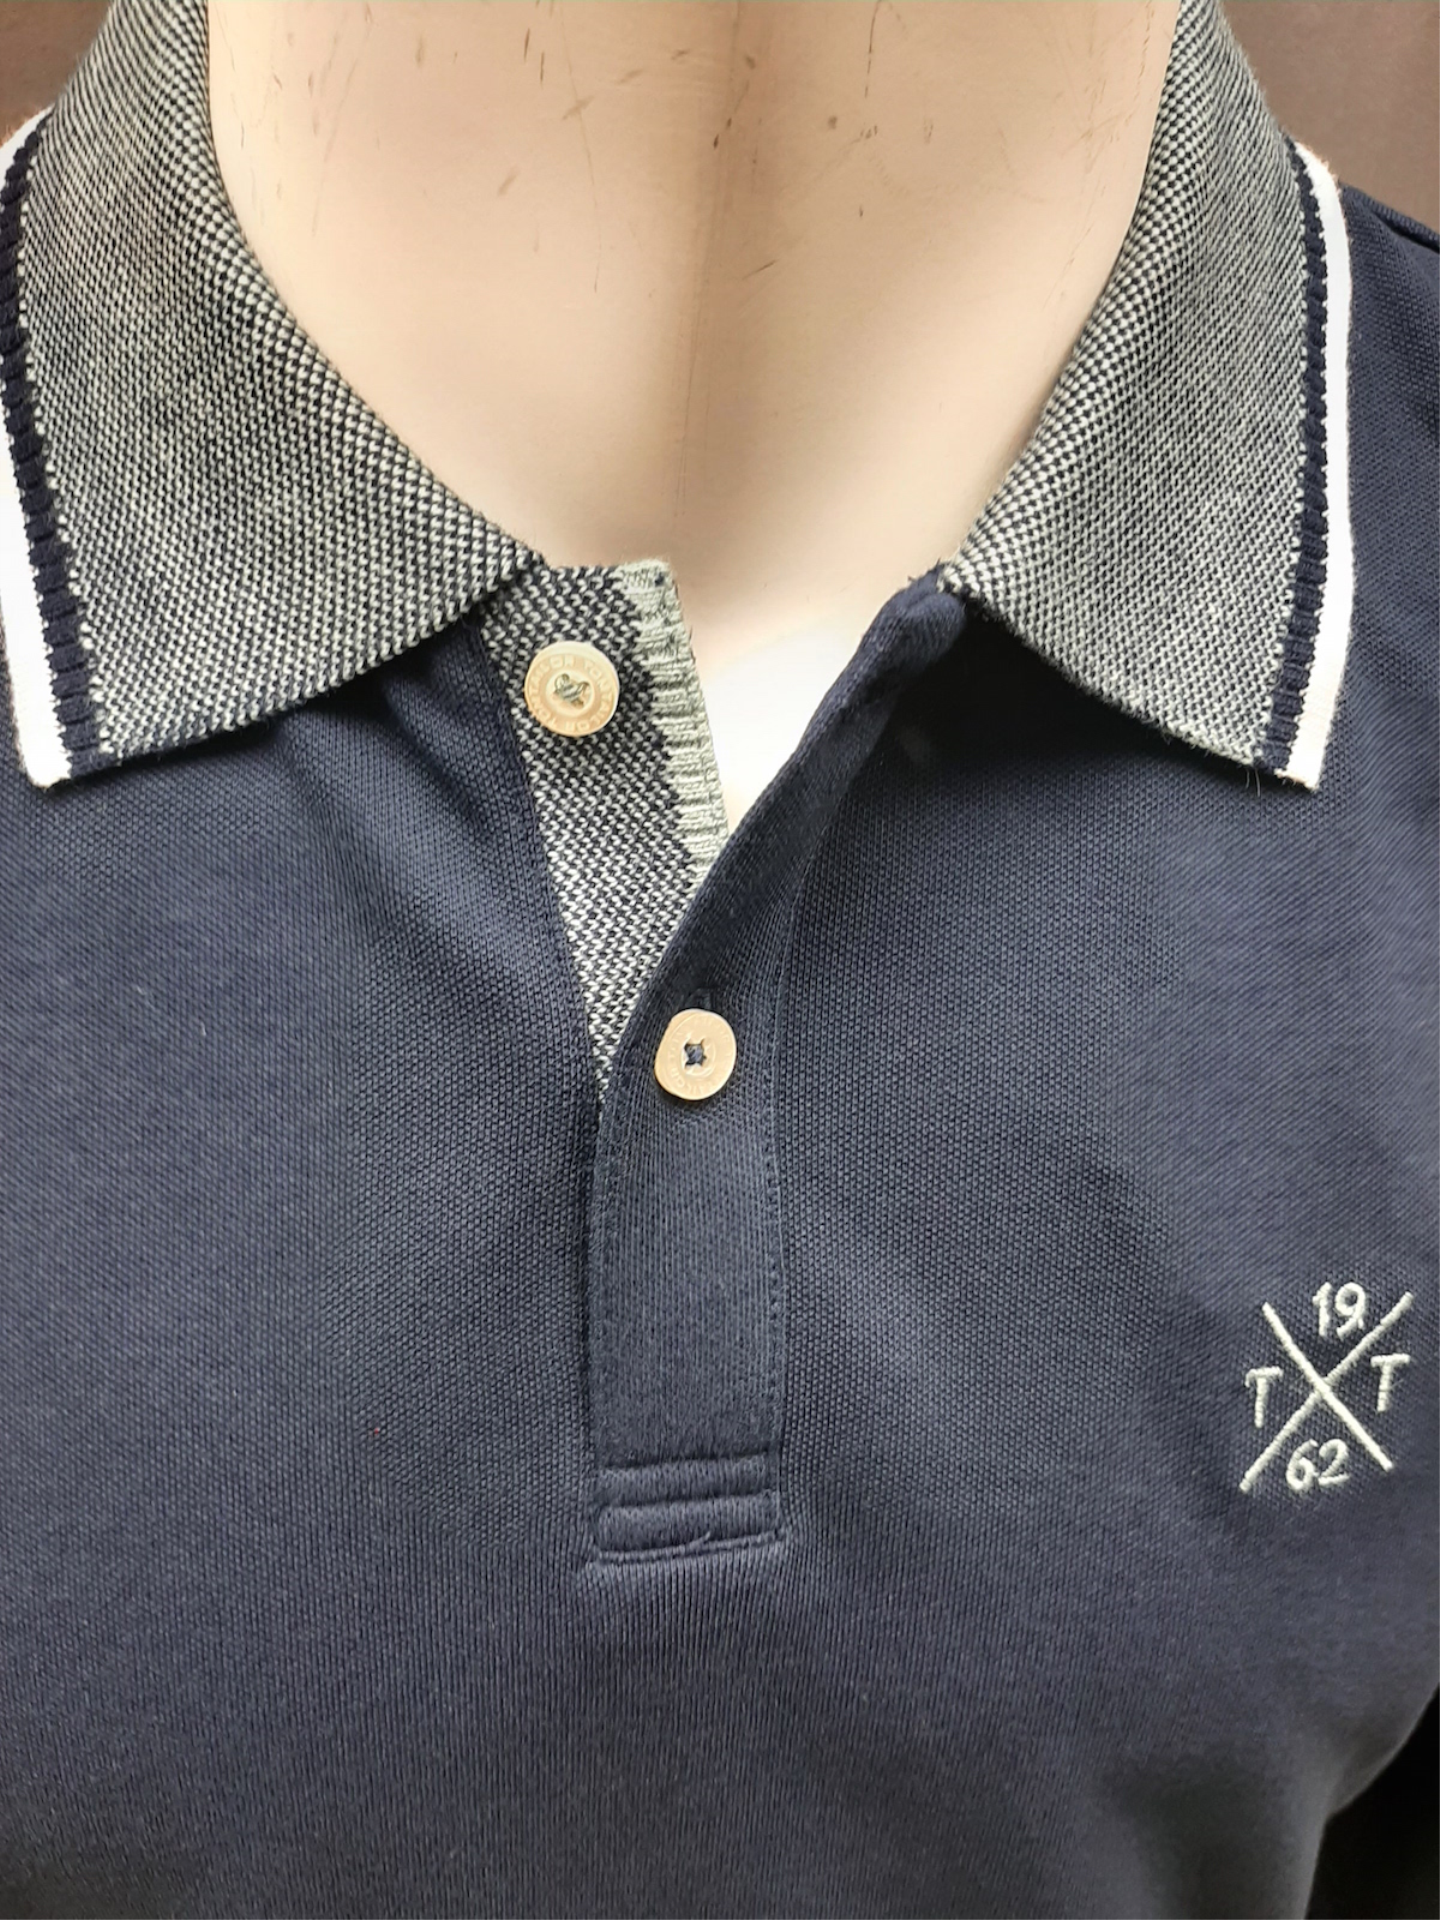 Tom Tailor  Polo with collar detail of rugbyshirt van Tom Tailor